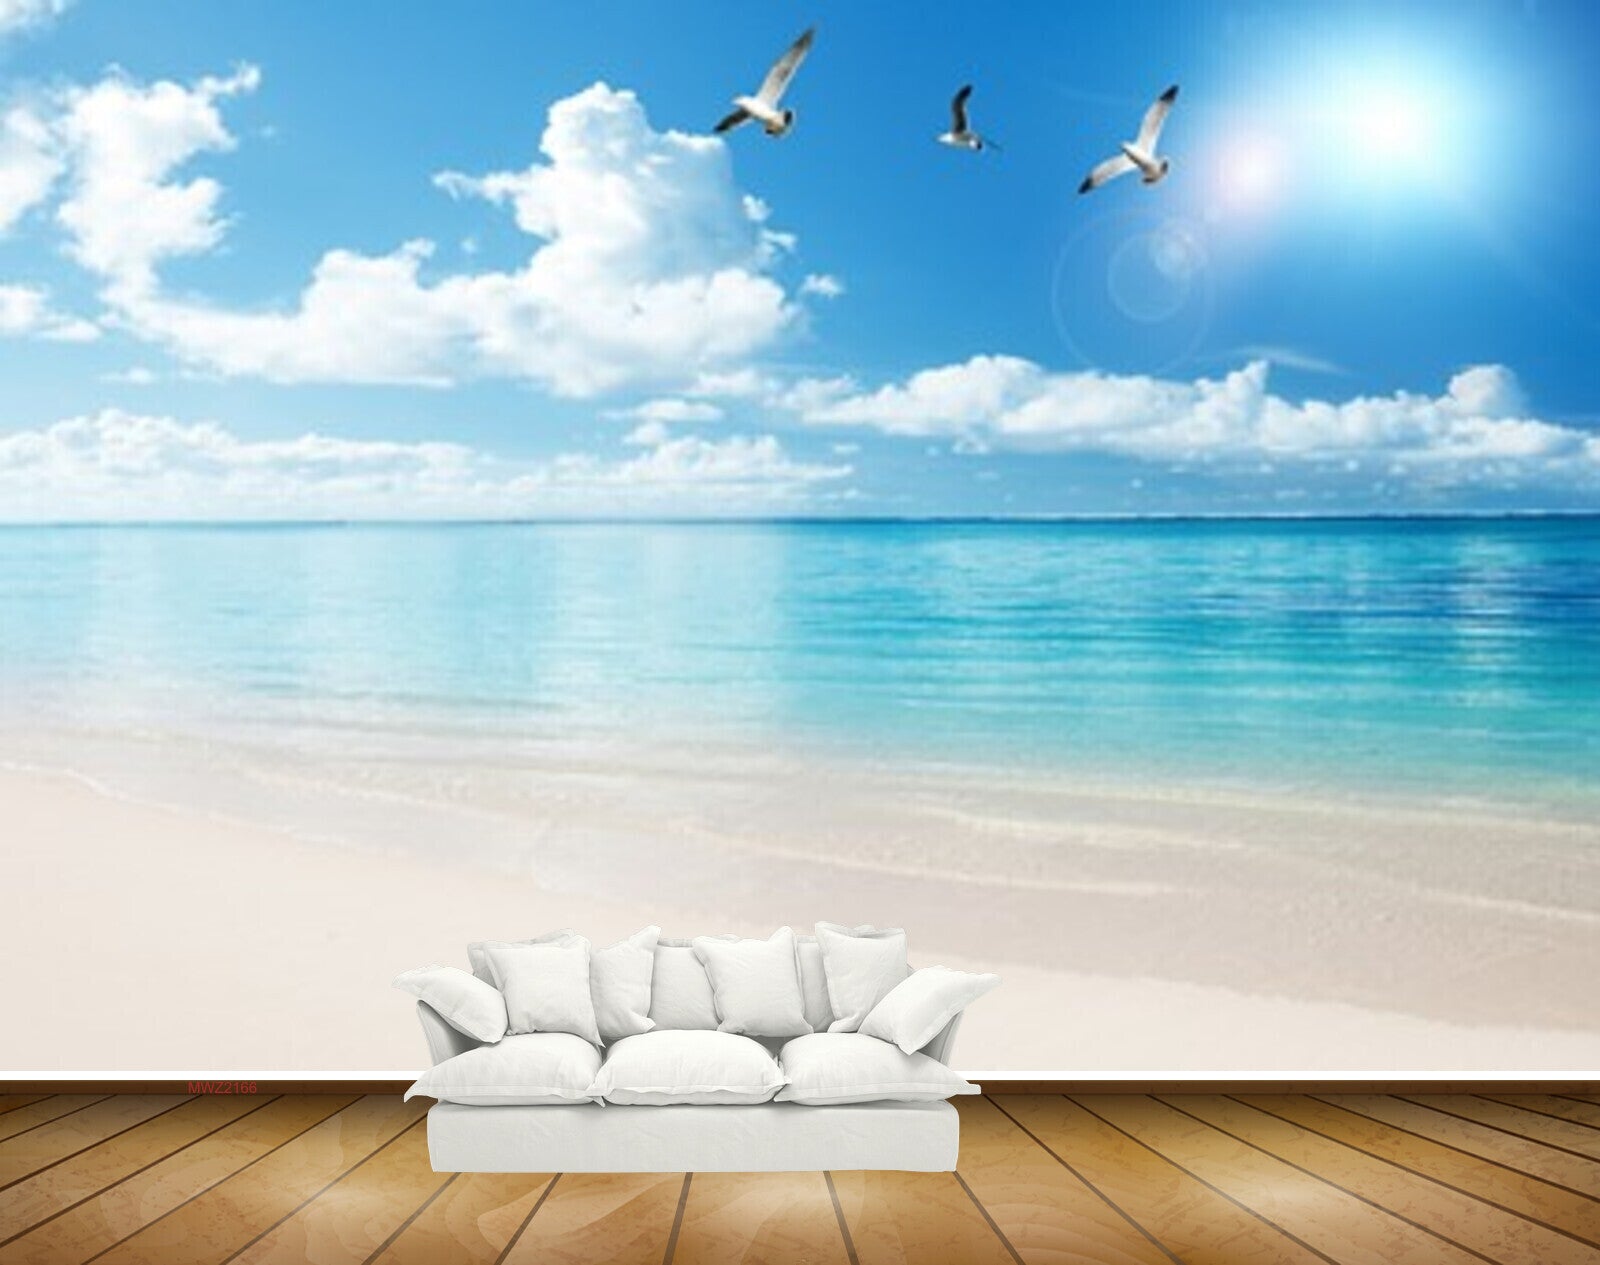 Clouds wallpaper  Wall murals with clouds